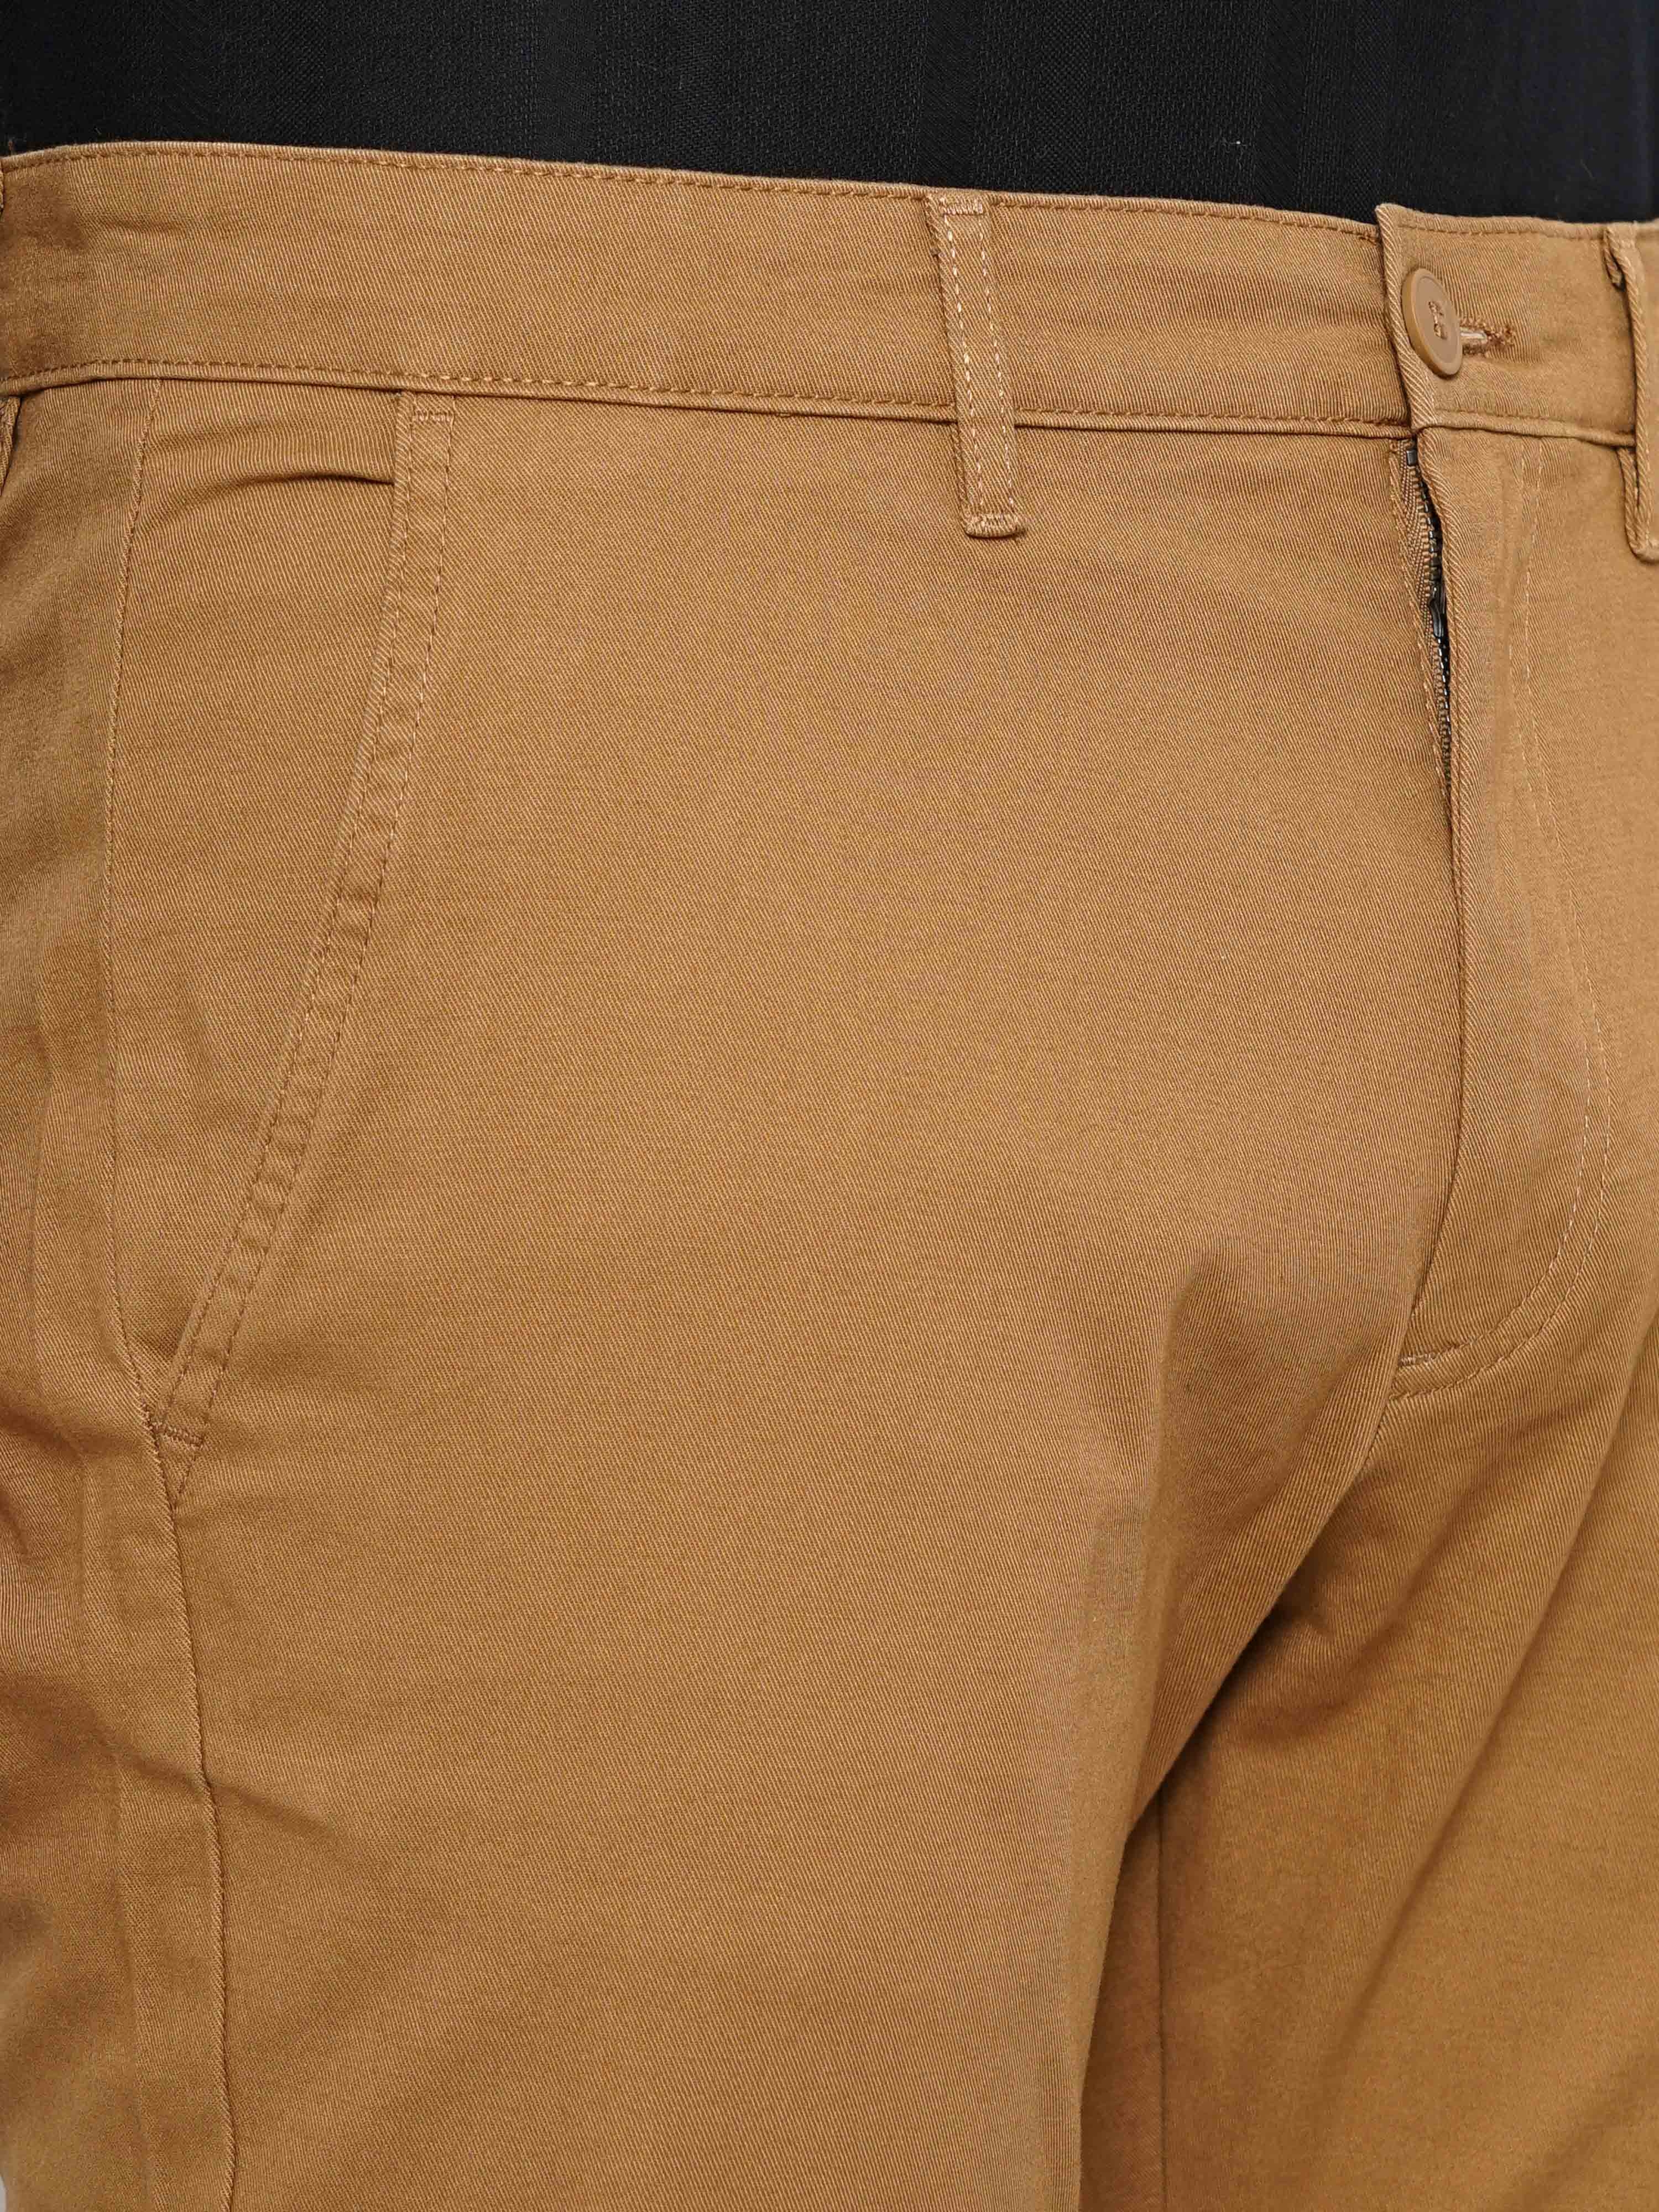 Celio Men Brown Solid Slim Fit Cotton Basic Chinos Casual Trousers